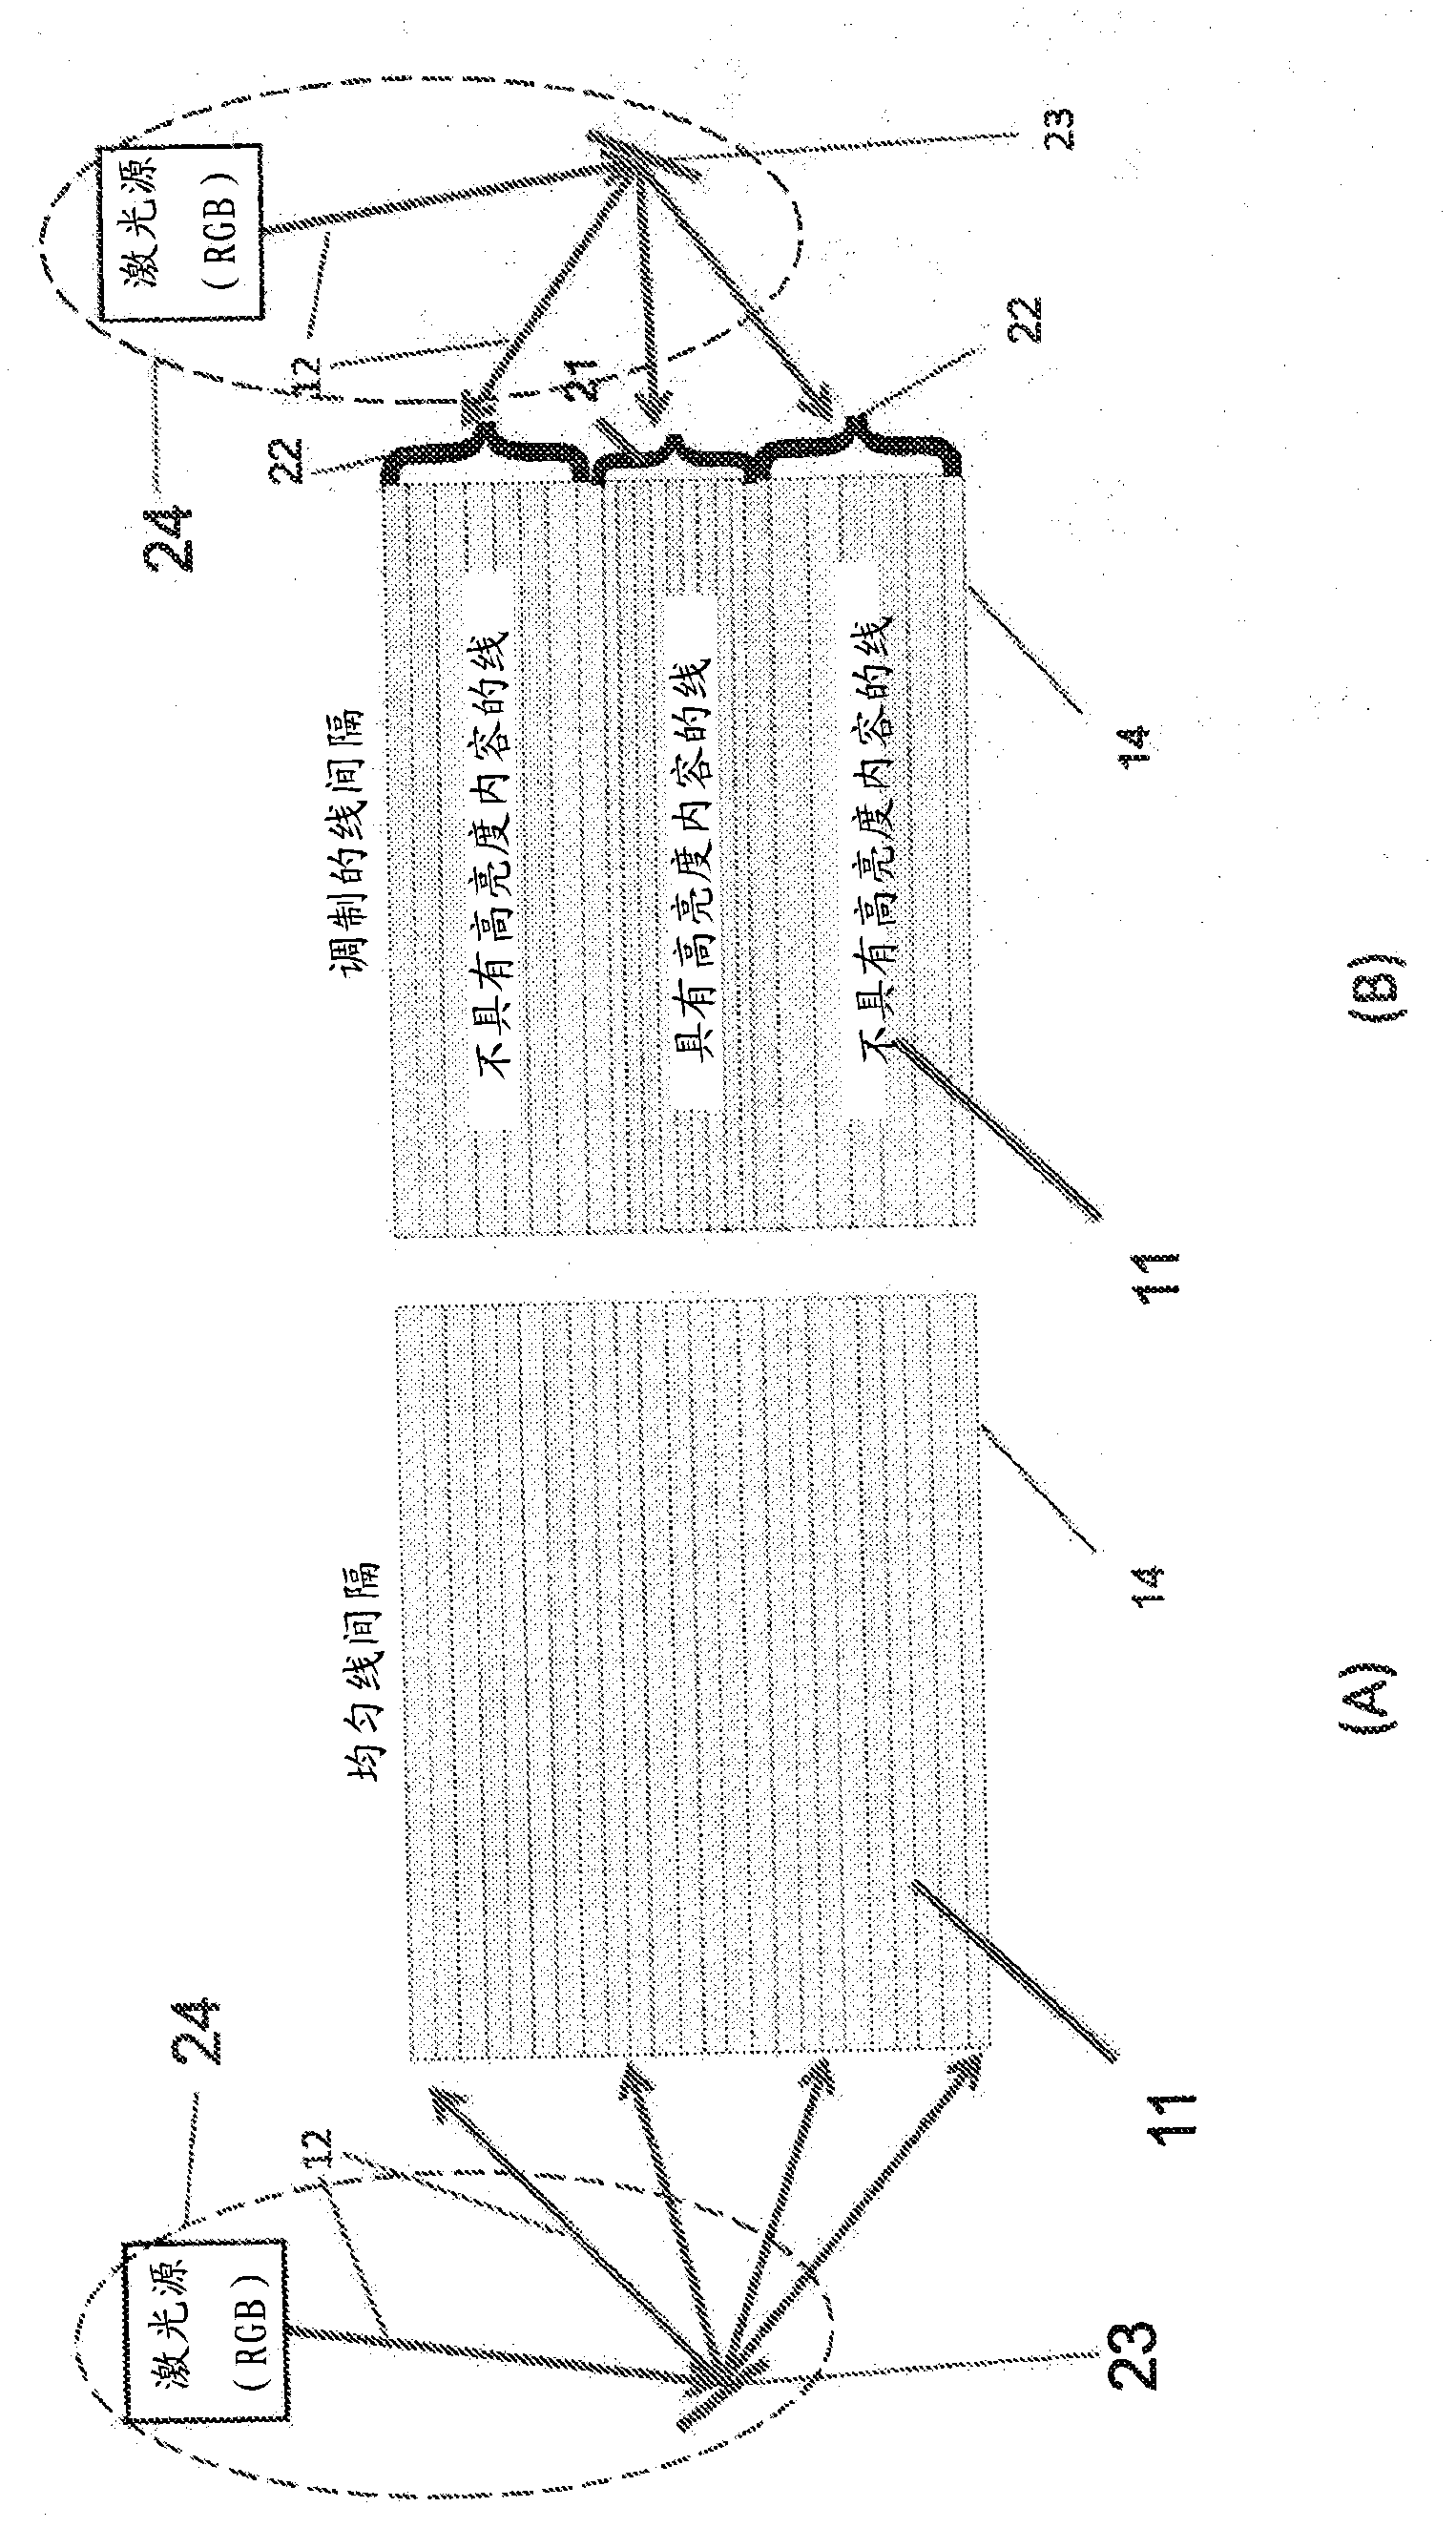 Variable and serrated scanning in laser projectors